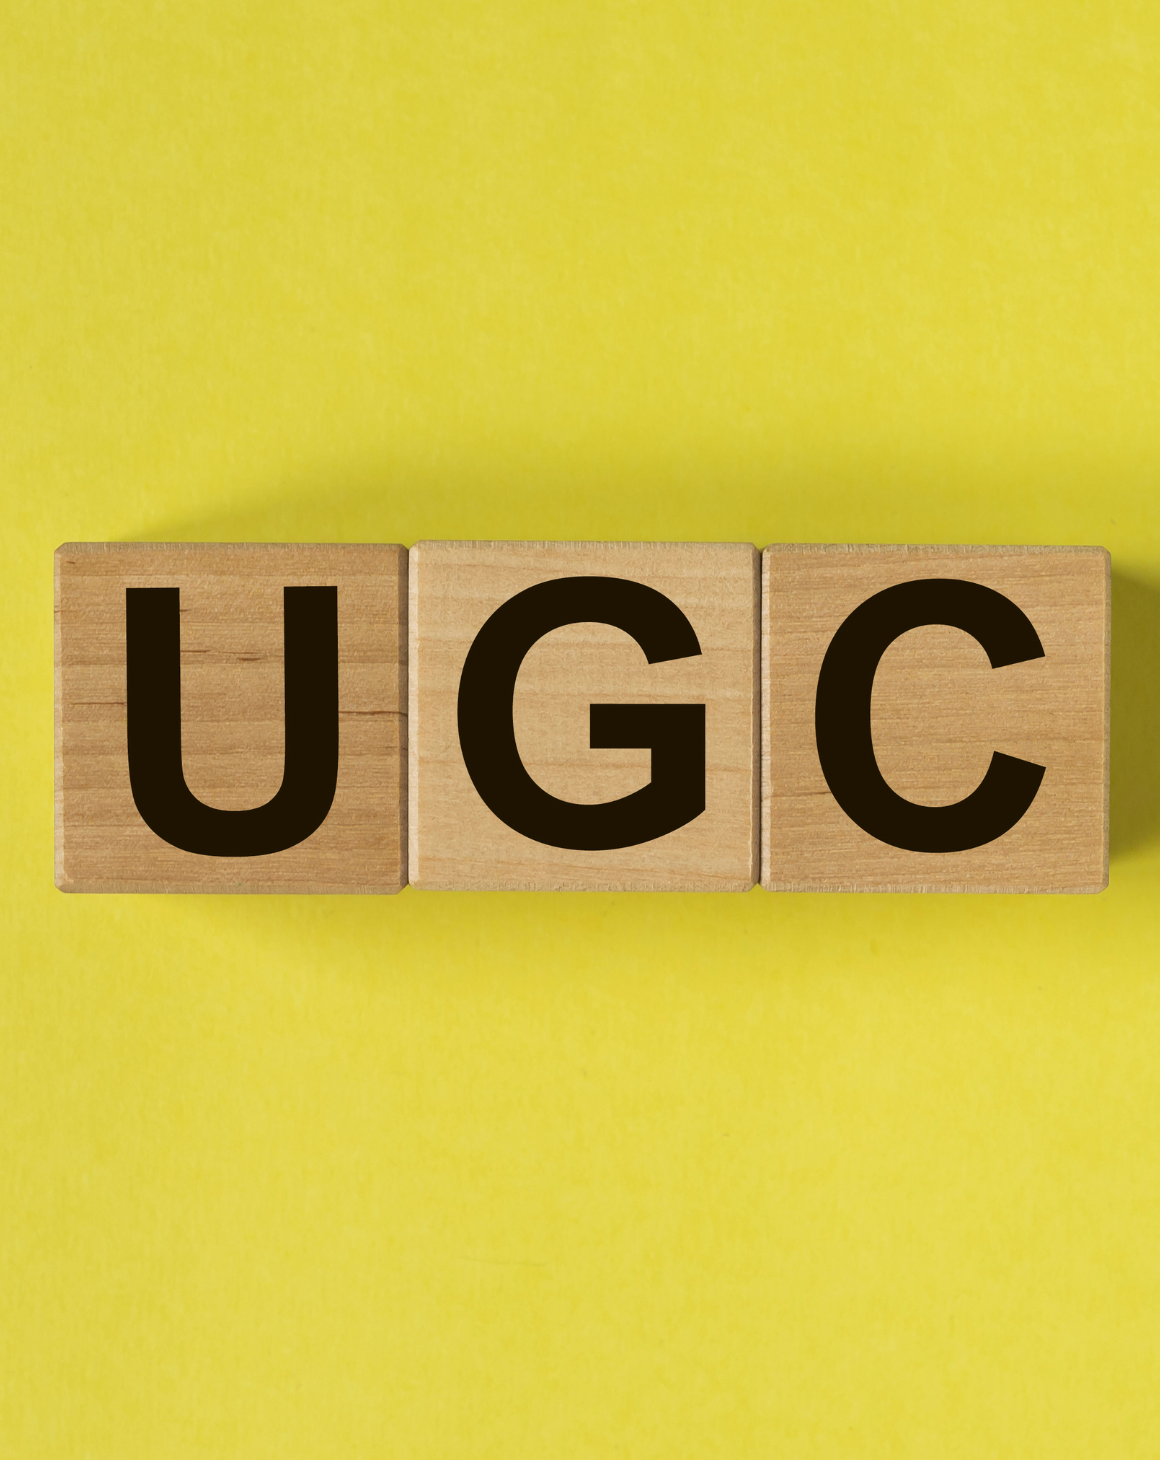 UGC letters on a yellow background